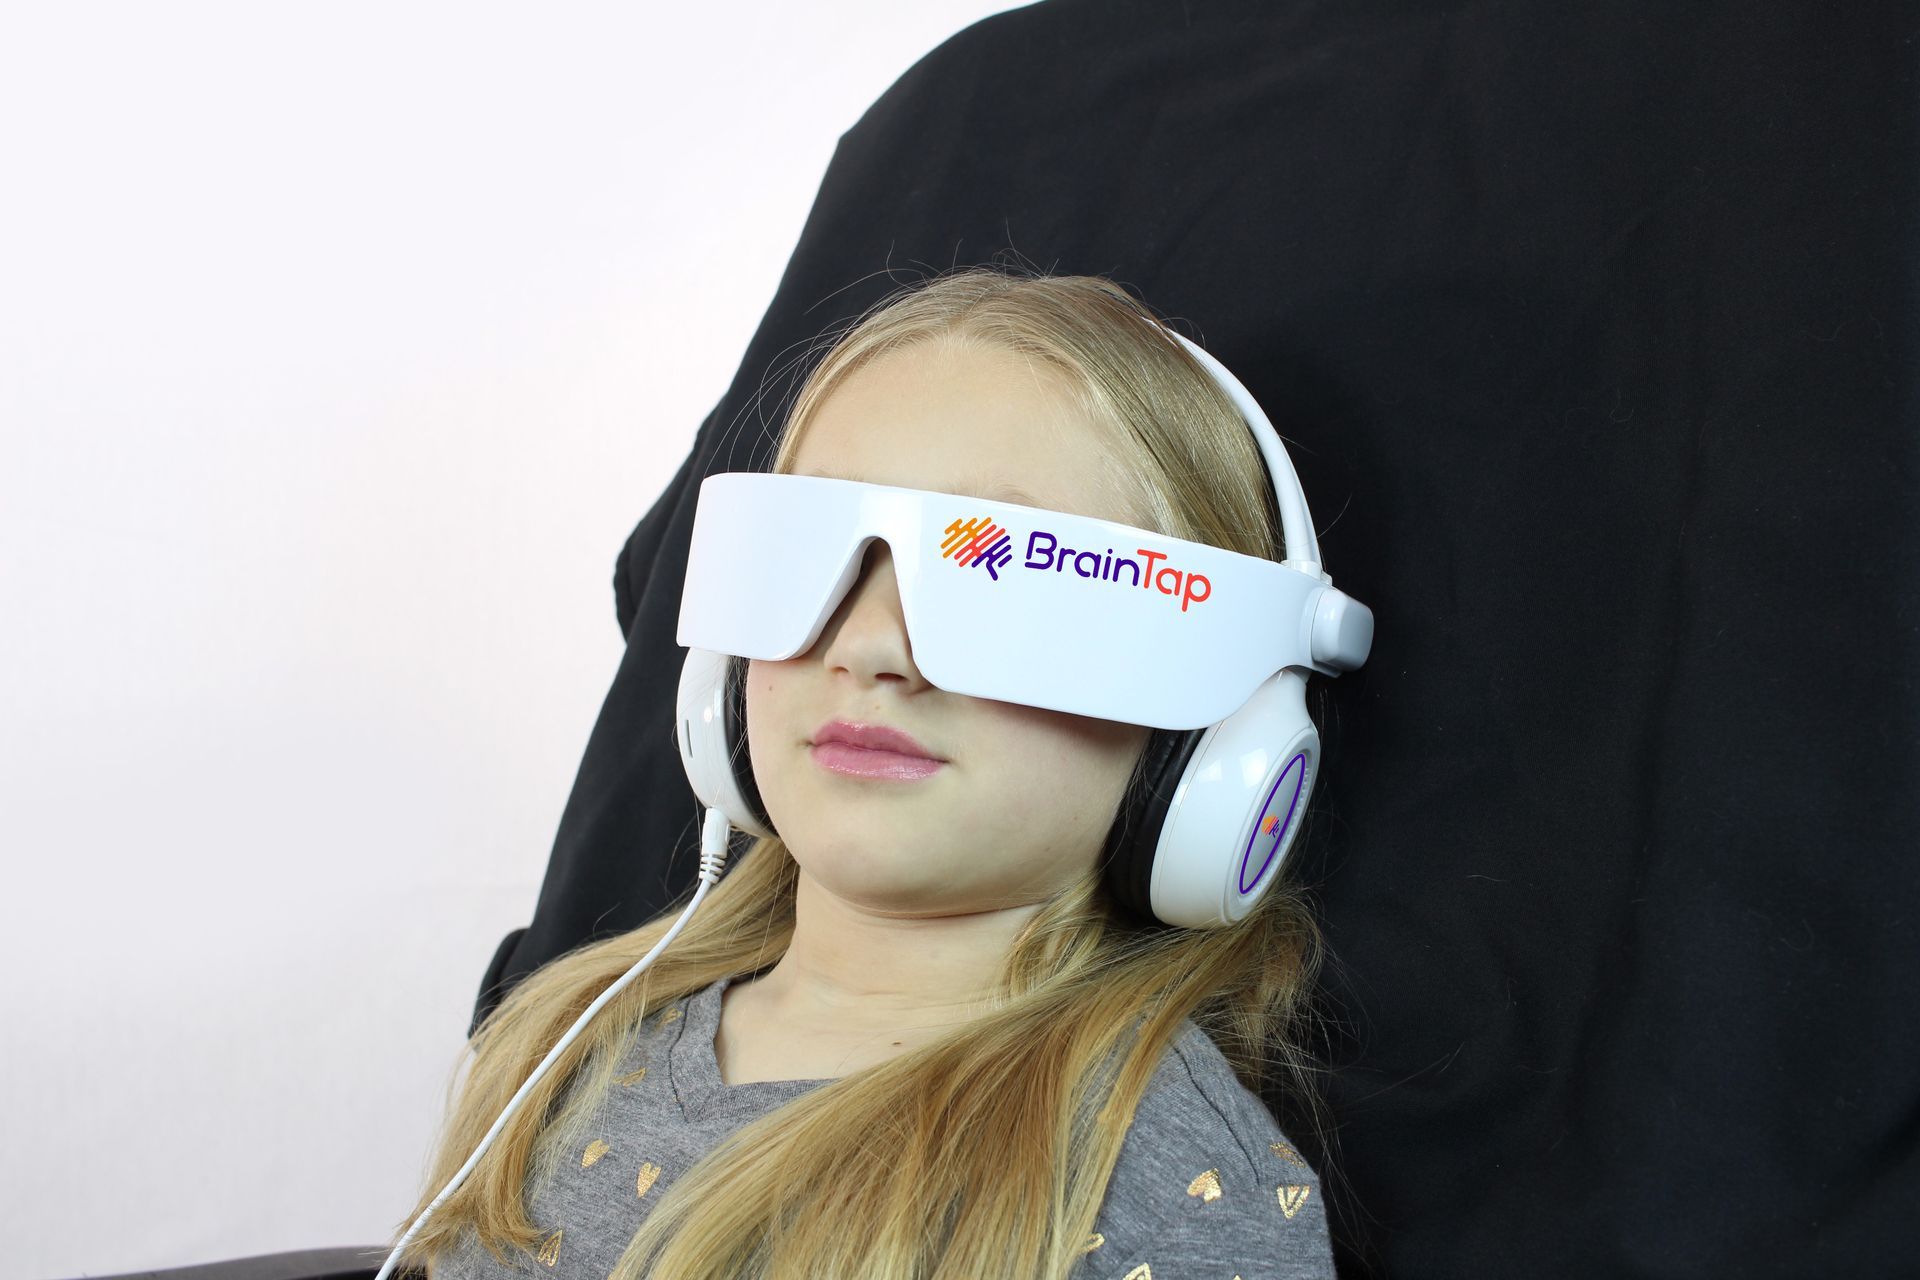 A young girl wearing headphones and sunglasses is sitting in a chair.